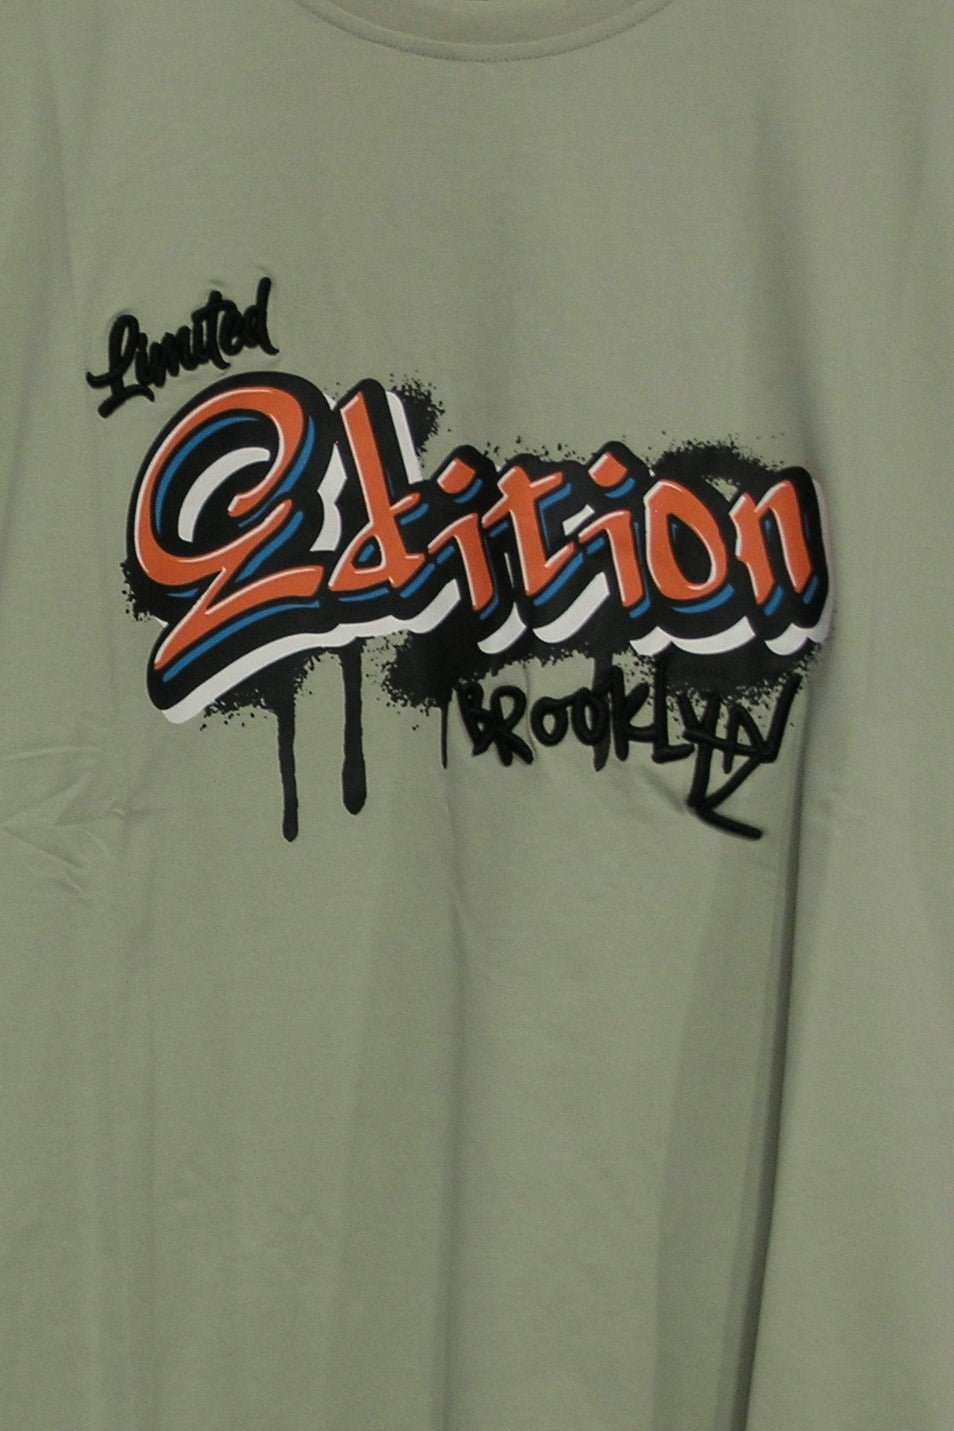 "Limited Edition" Graphic Tee